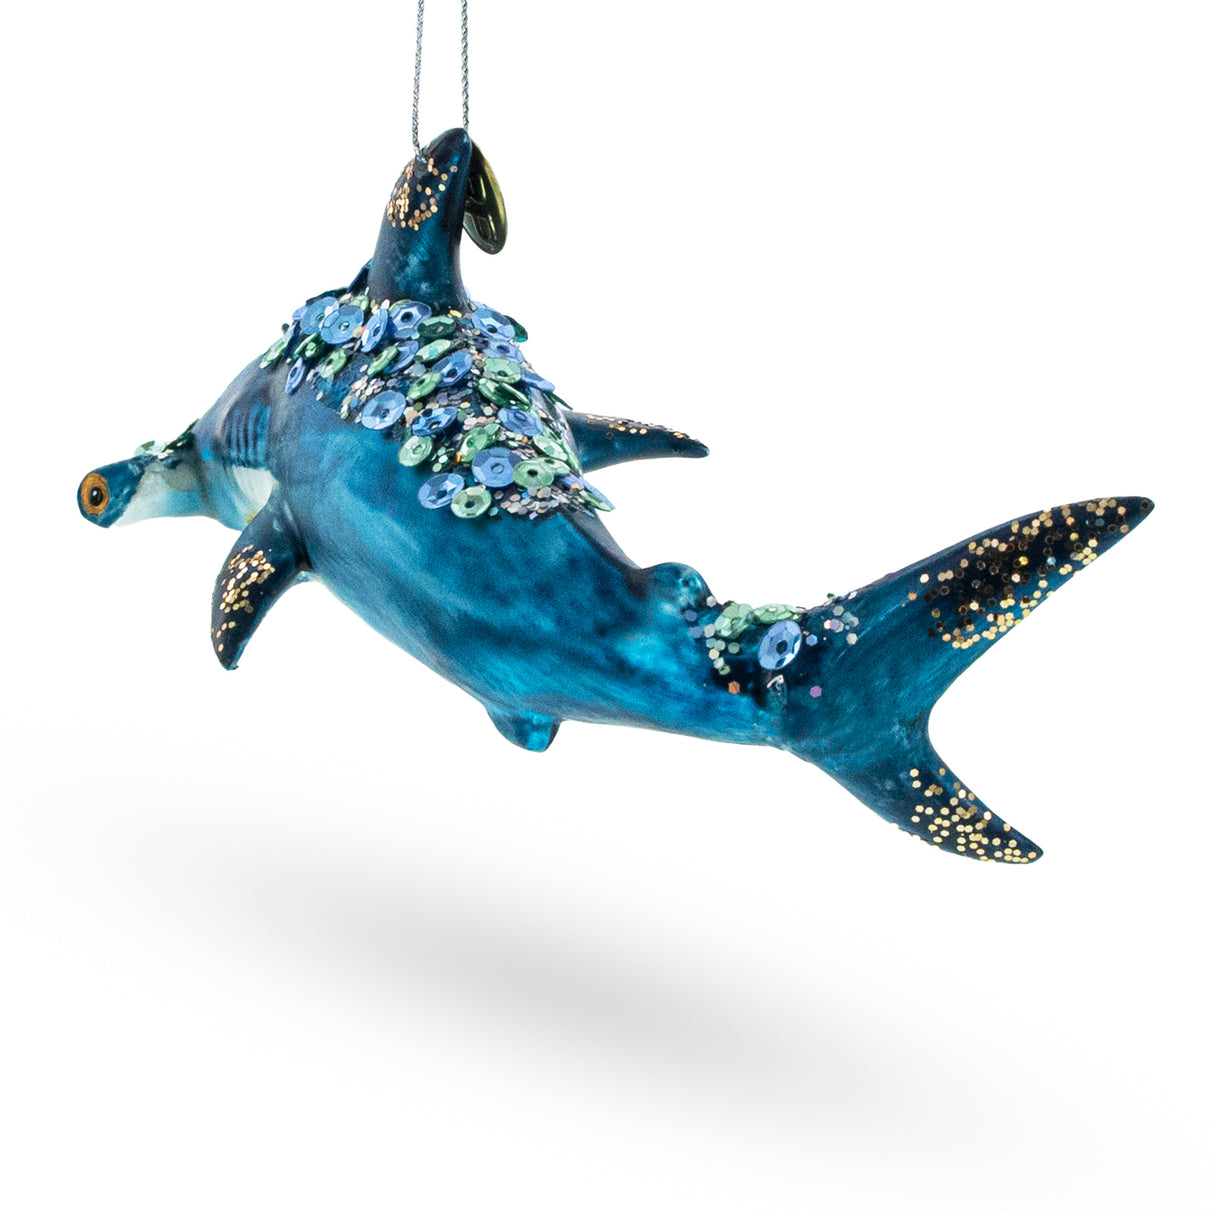 Buy Christmas Ornaments Animals Fish and Sea World Sharks by BestPysanky Online Gift Ship